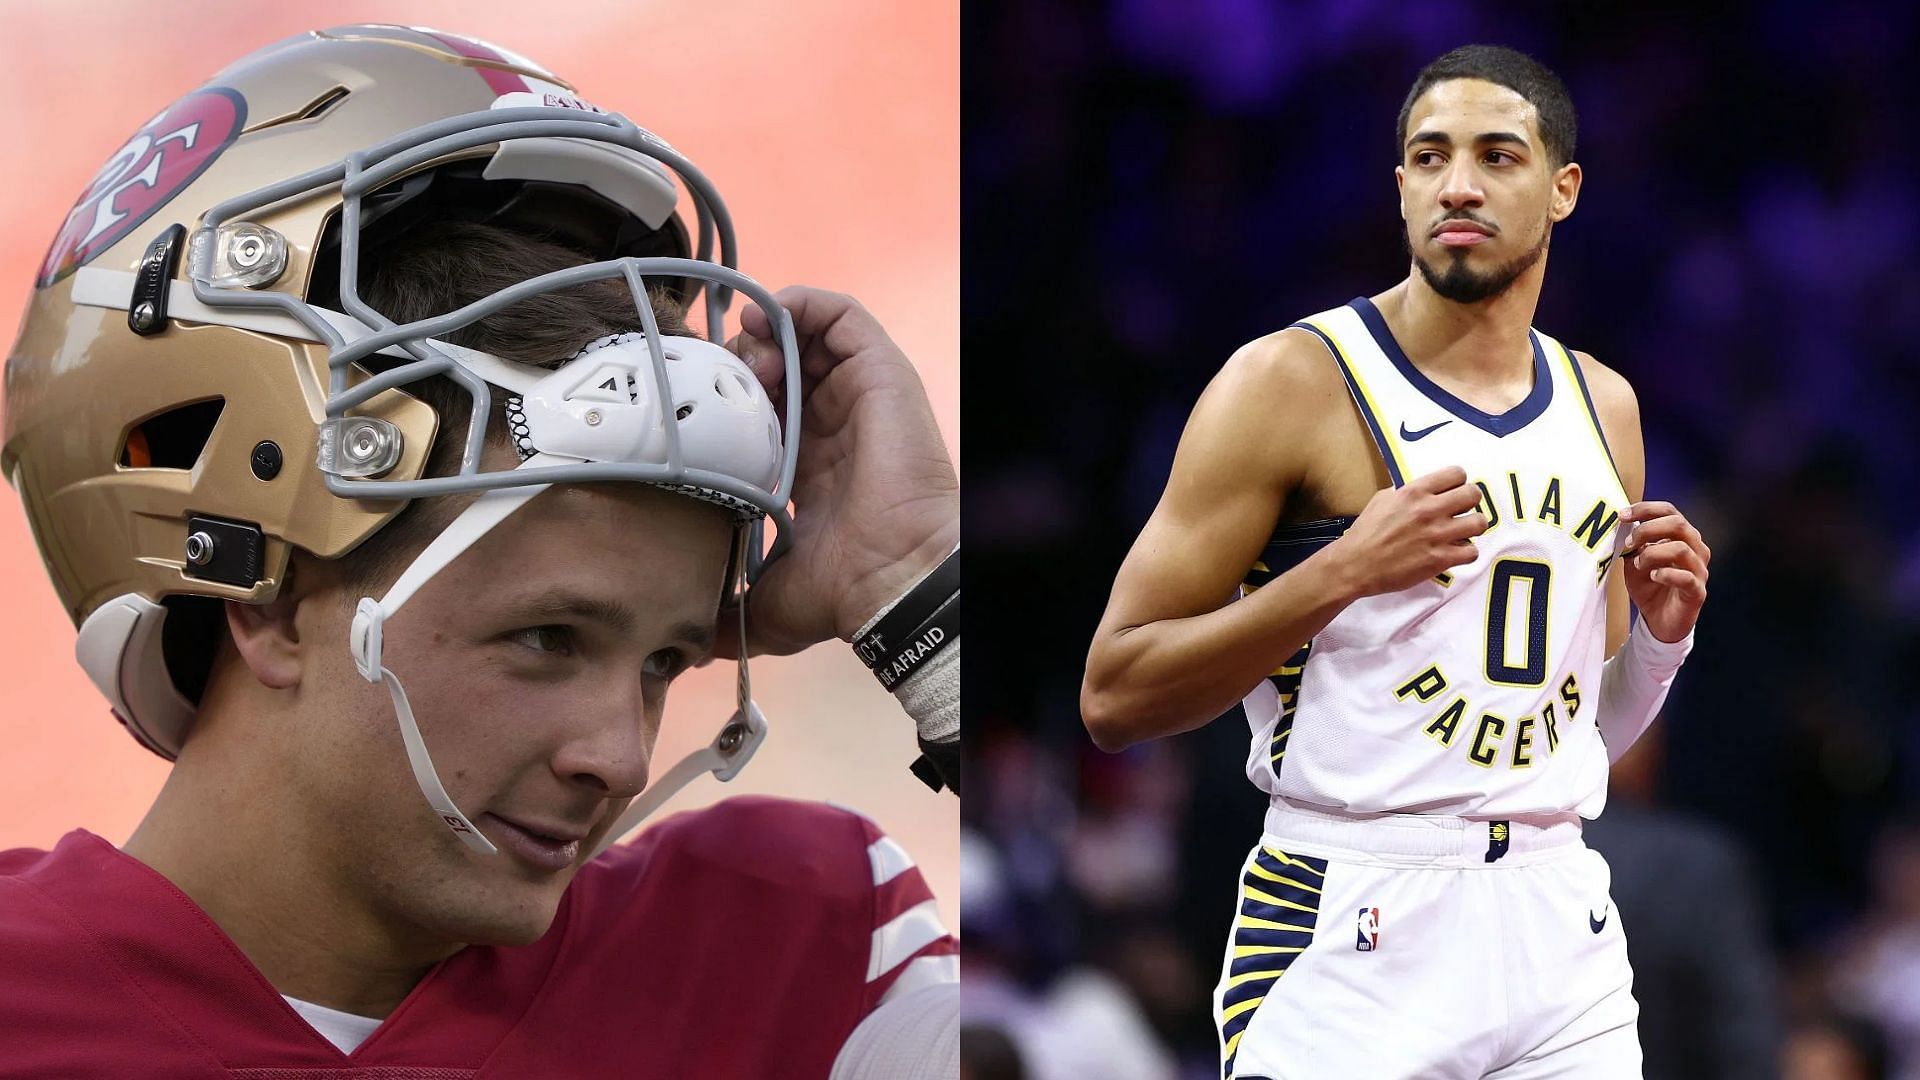 Brock Purdy and Tyrese Haliburton know each other from their days at Iowa State